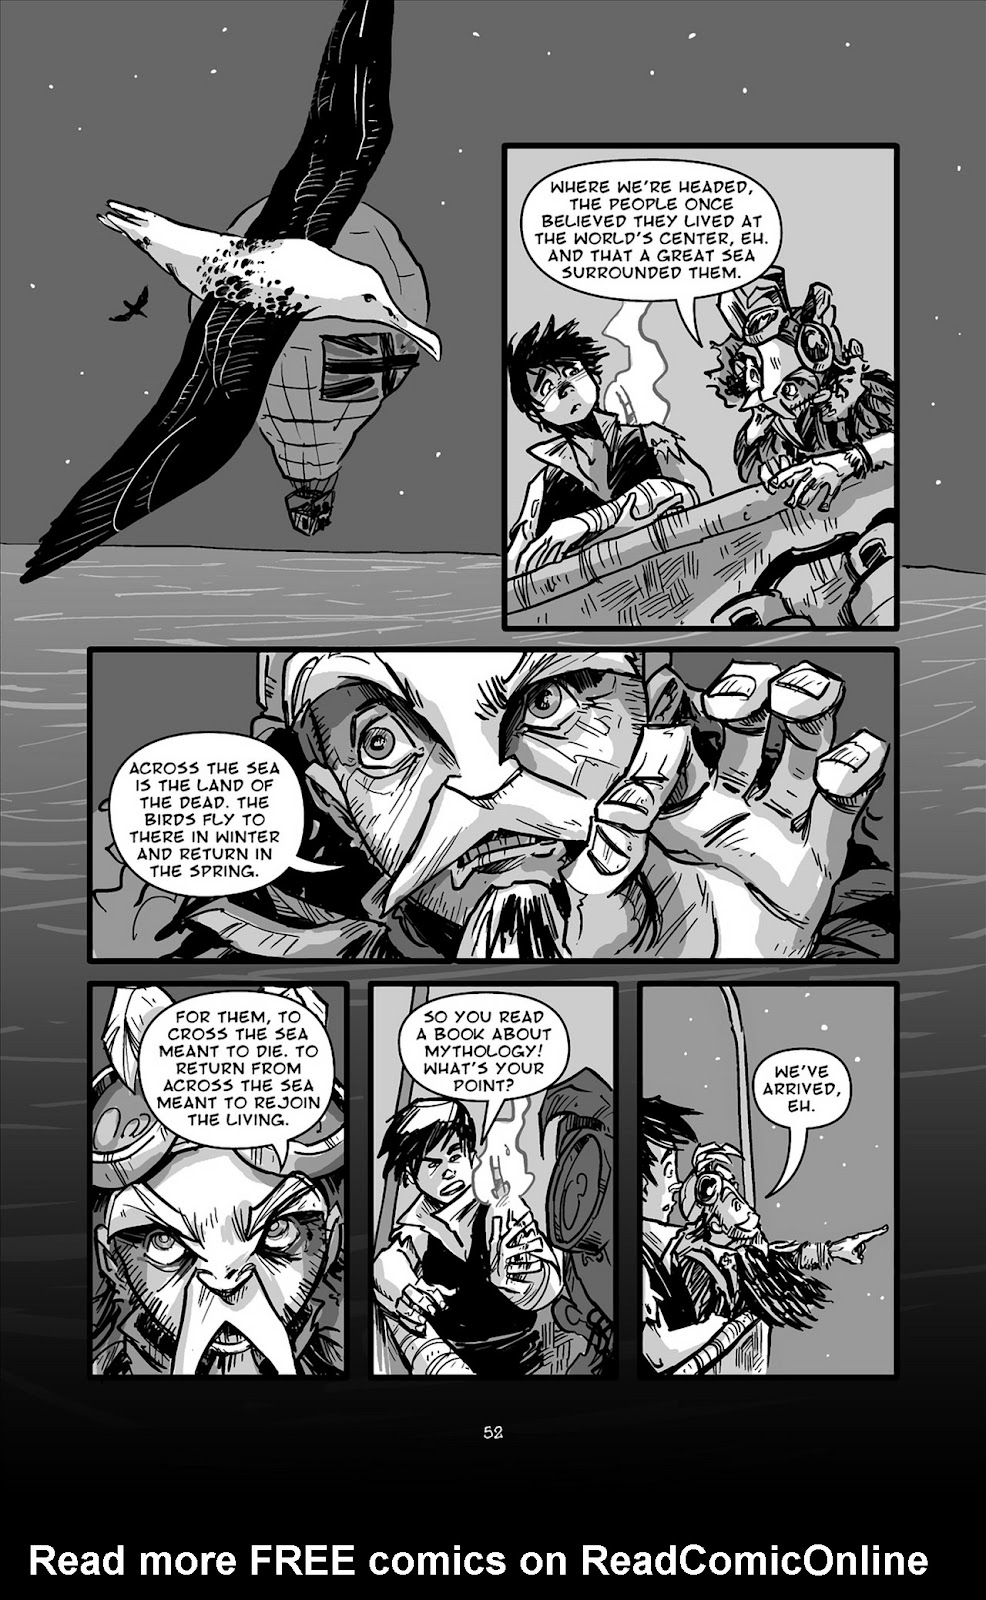 Pinocchio: Vampire Slayer - Of Wood and Blood issue 3 - Page 3